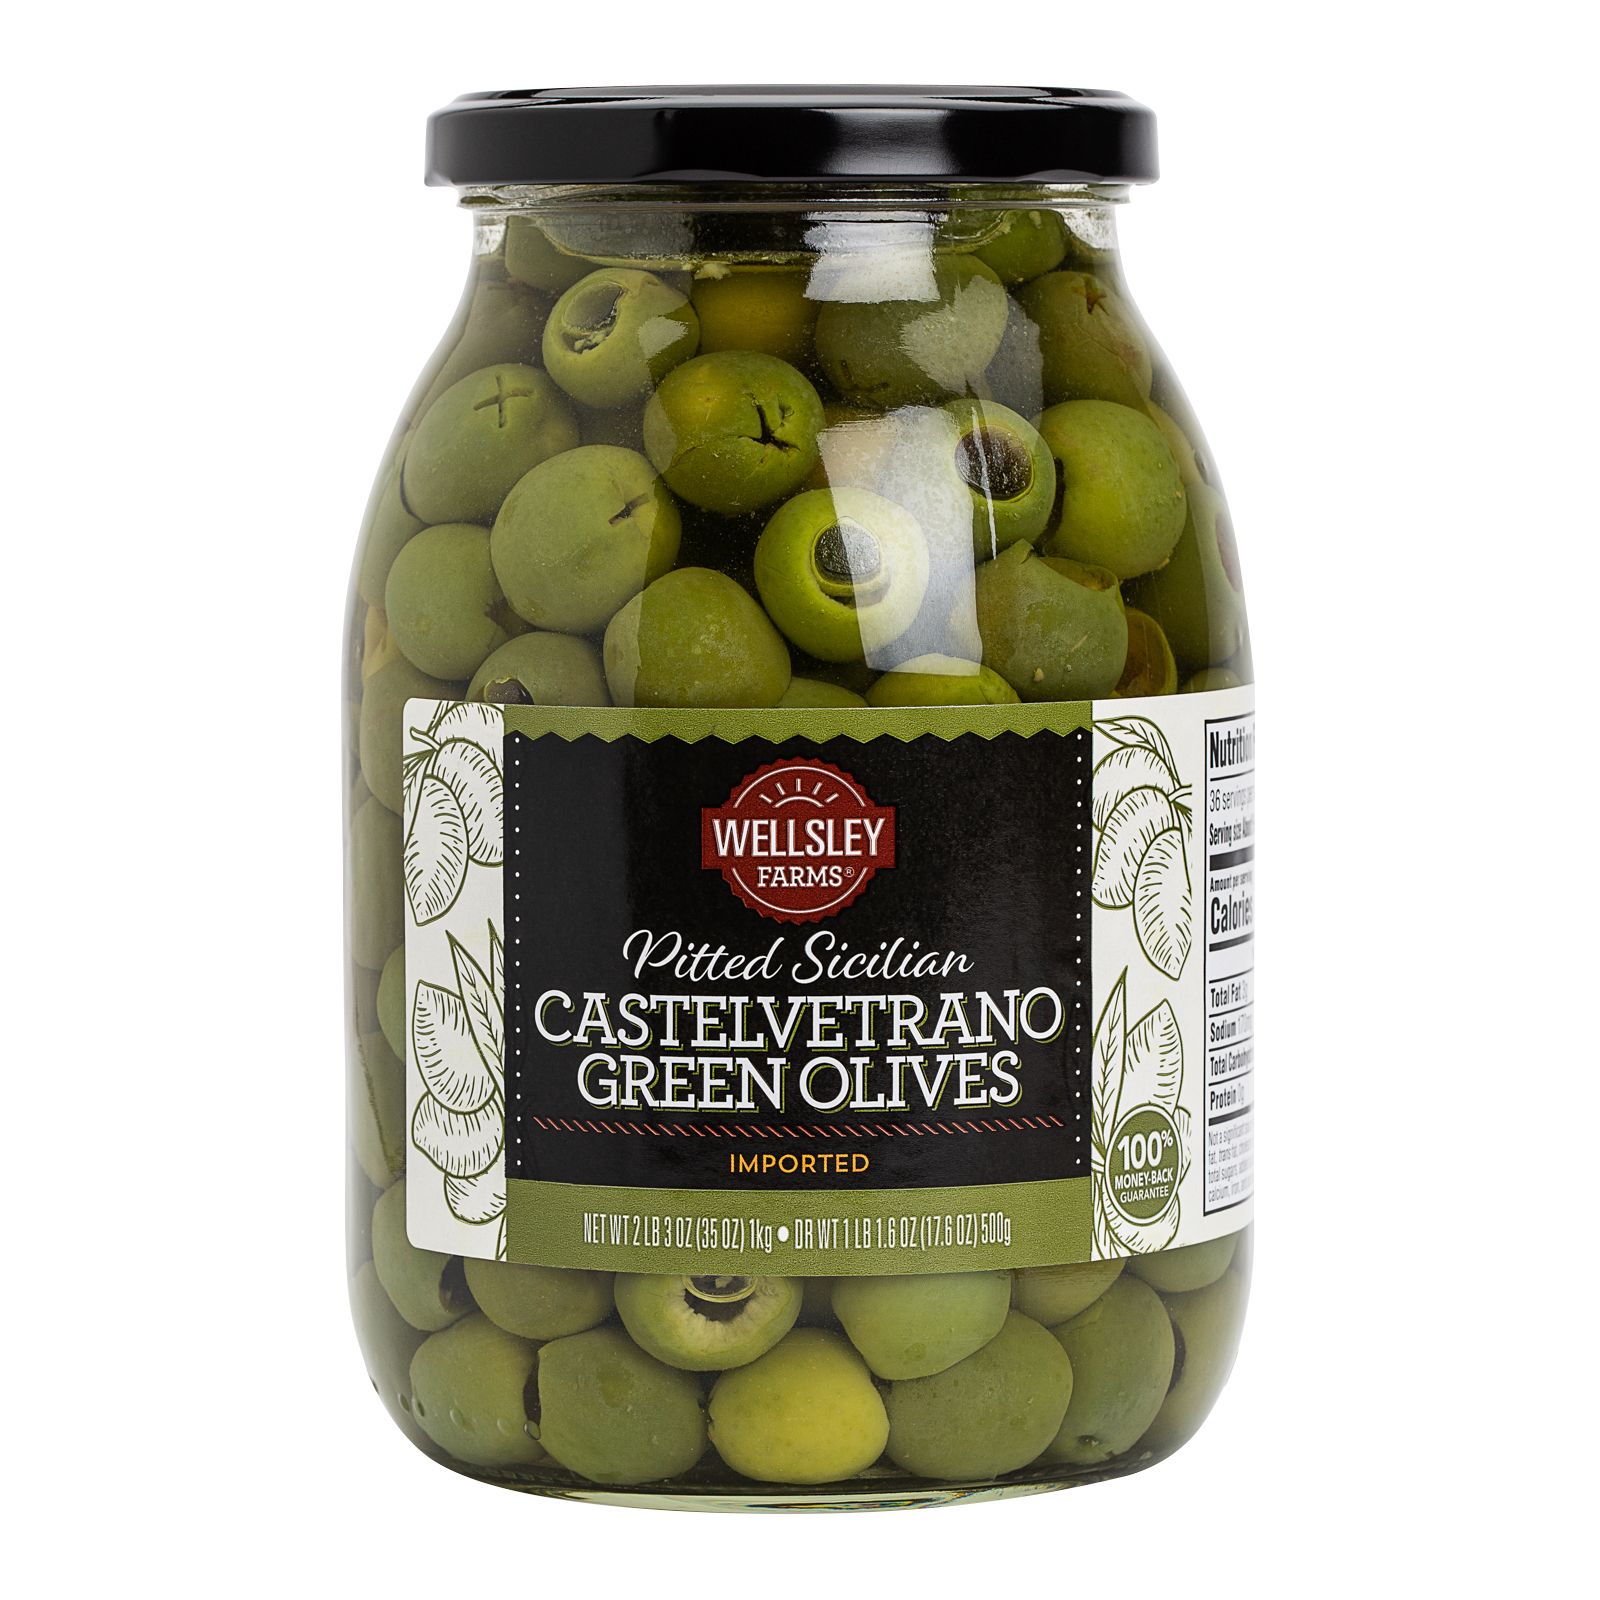 Wellsley Farms Castelvetrano Pitted Sicilian Green Olives, 35.3 oz.